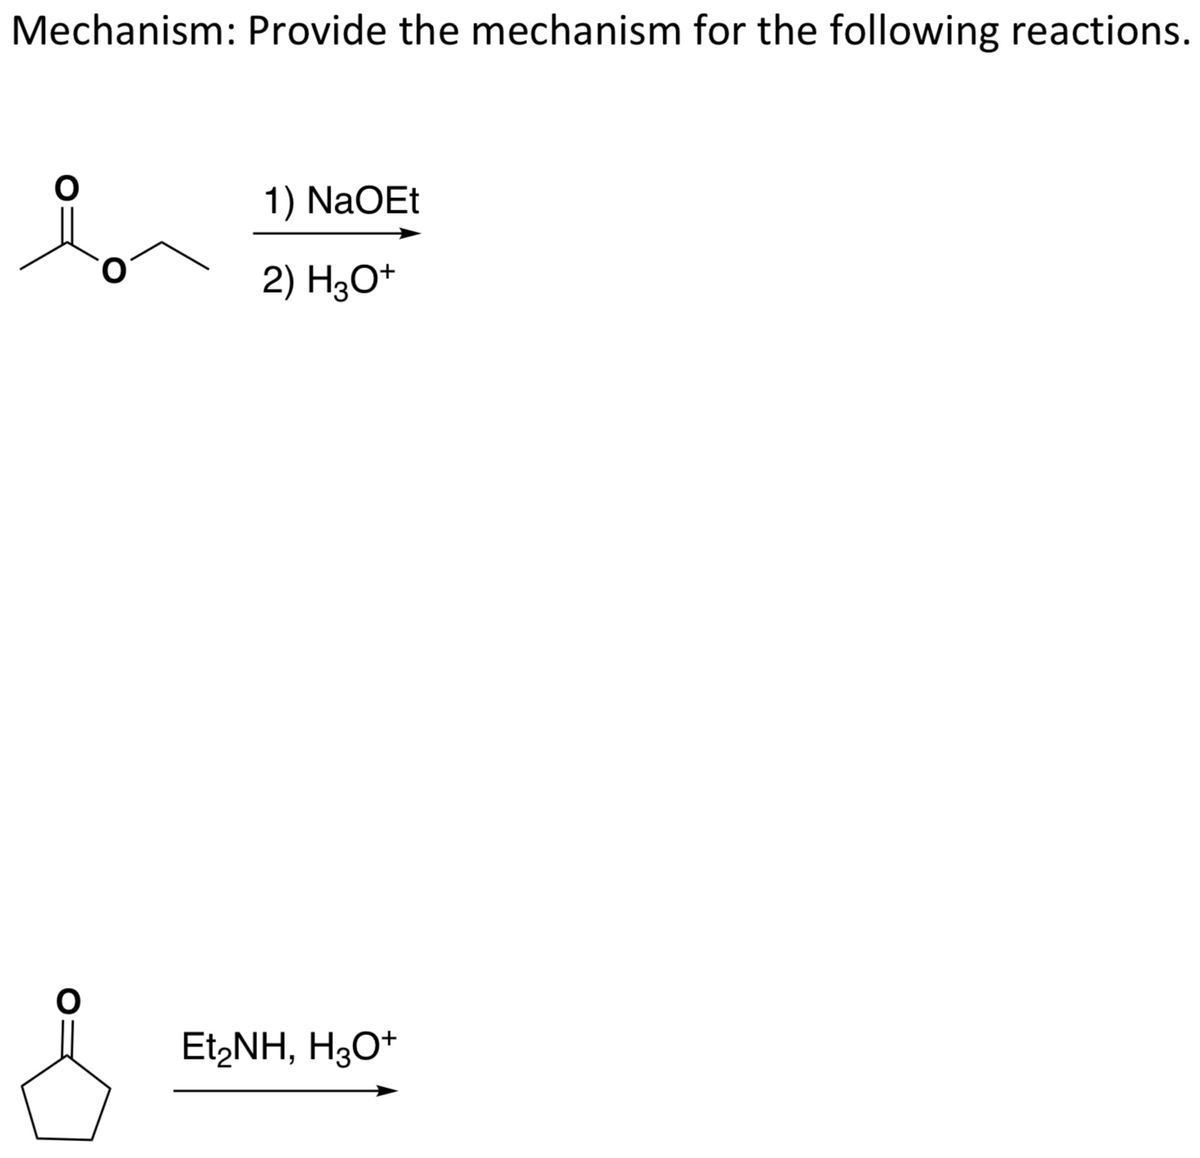 Mechanism: Provide the mechanism for the following reactions.
1) NaOEt
2) H3O*
Et,NH, H3O+
